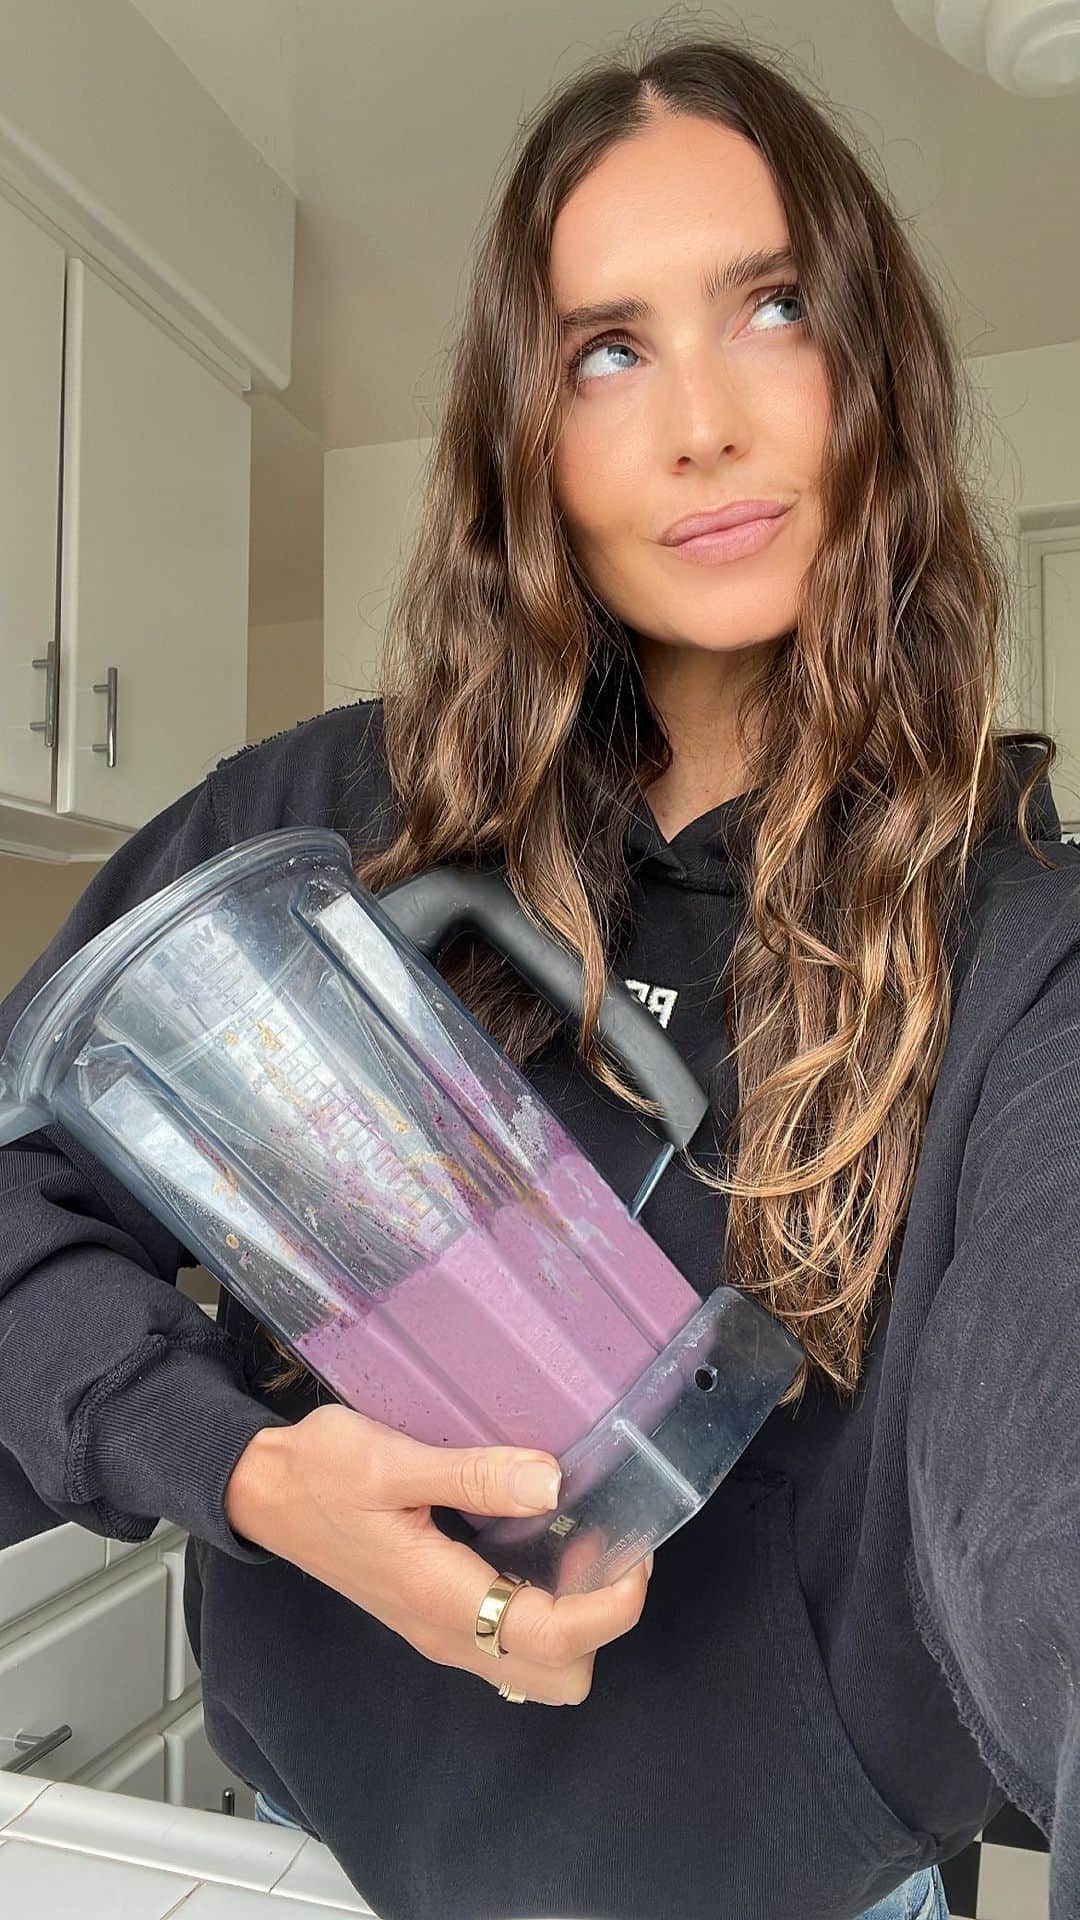 Kirsty Godsoのインスタグラム：「Me and my blender - a love story 😂🫶🏼 Join me in my kitchen making my fav @madeof_____ smoothie! Recipe and some tips below: - 1 scoop @madeof_____ Vanilla protein - 1 tsp L-glutamine powder - 1 serving @osloskinlab collagen powder - Frozen organic blueberries - 1/4 frozen banana - 1 tsp raw almond butter - Dash of cinnamon - 4oz water or preferred liquid 🌪️ well  * Frozen fruit is key! Fresh fruit can make the smoothie more airy which I personally find harder to digest. I’ve also found that using no ice is a game changer!  * Whey protein isolate has essentially all the lactose removed meaning many lactose intolerant people can also consume it with confidence.  * @madeof_____ is by far one of the cleanest proteins on the market. Packed with 25grams of protein per serving and all 9 of the essential amino acids :)  * Food should make you feel good. Honor your body, listen to your body, read ingredients 🫶🏼✨  #protein #smoothie #recipe」